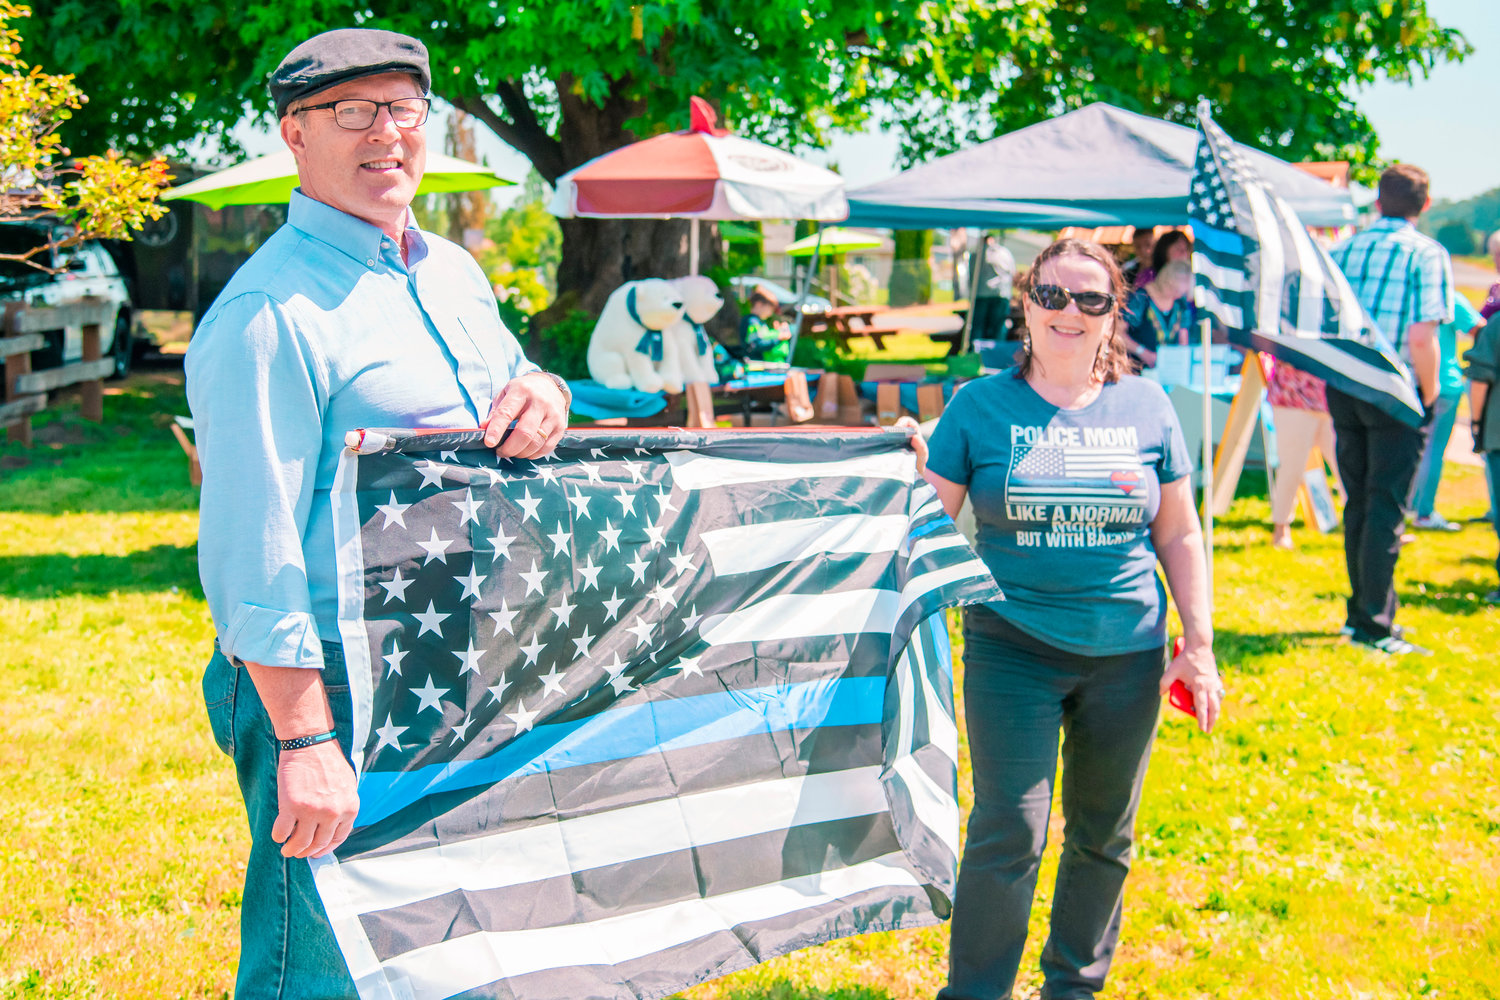 Stephen and Kathleen Kvavle smile while holding a “Thin Blue Line” flag in Adna on Saturday. The “Back the Blue” event was held at Adna Grocery and featured food, live music, merchandise and more.  It was held from 11 a.m. to 4 p.m. and coincided with the opening of a new burger bar by Adna Grocery owner Jim Smith.